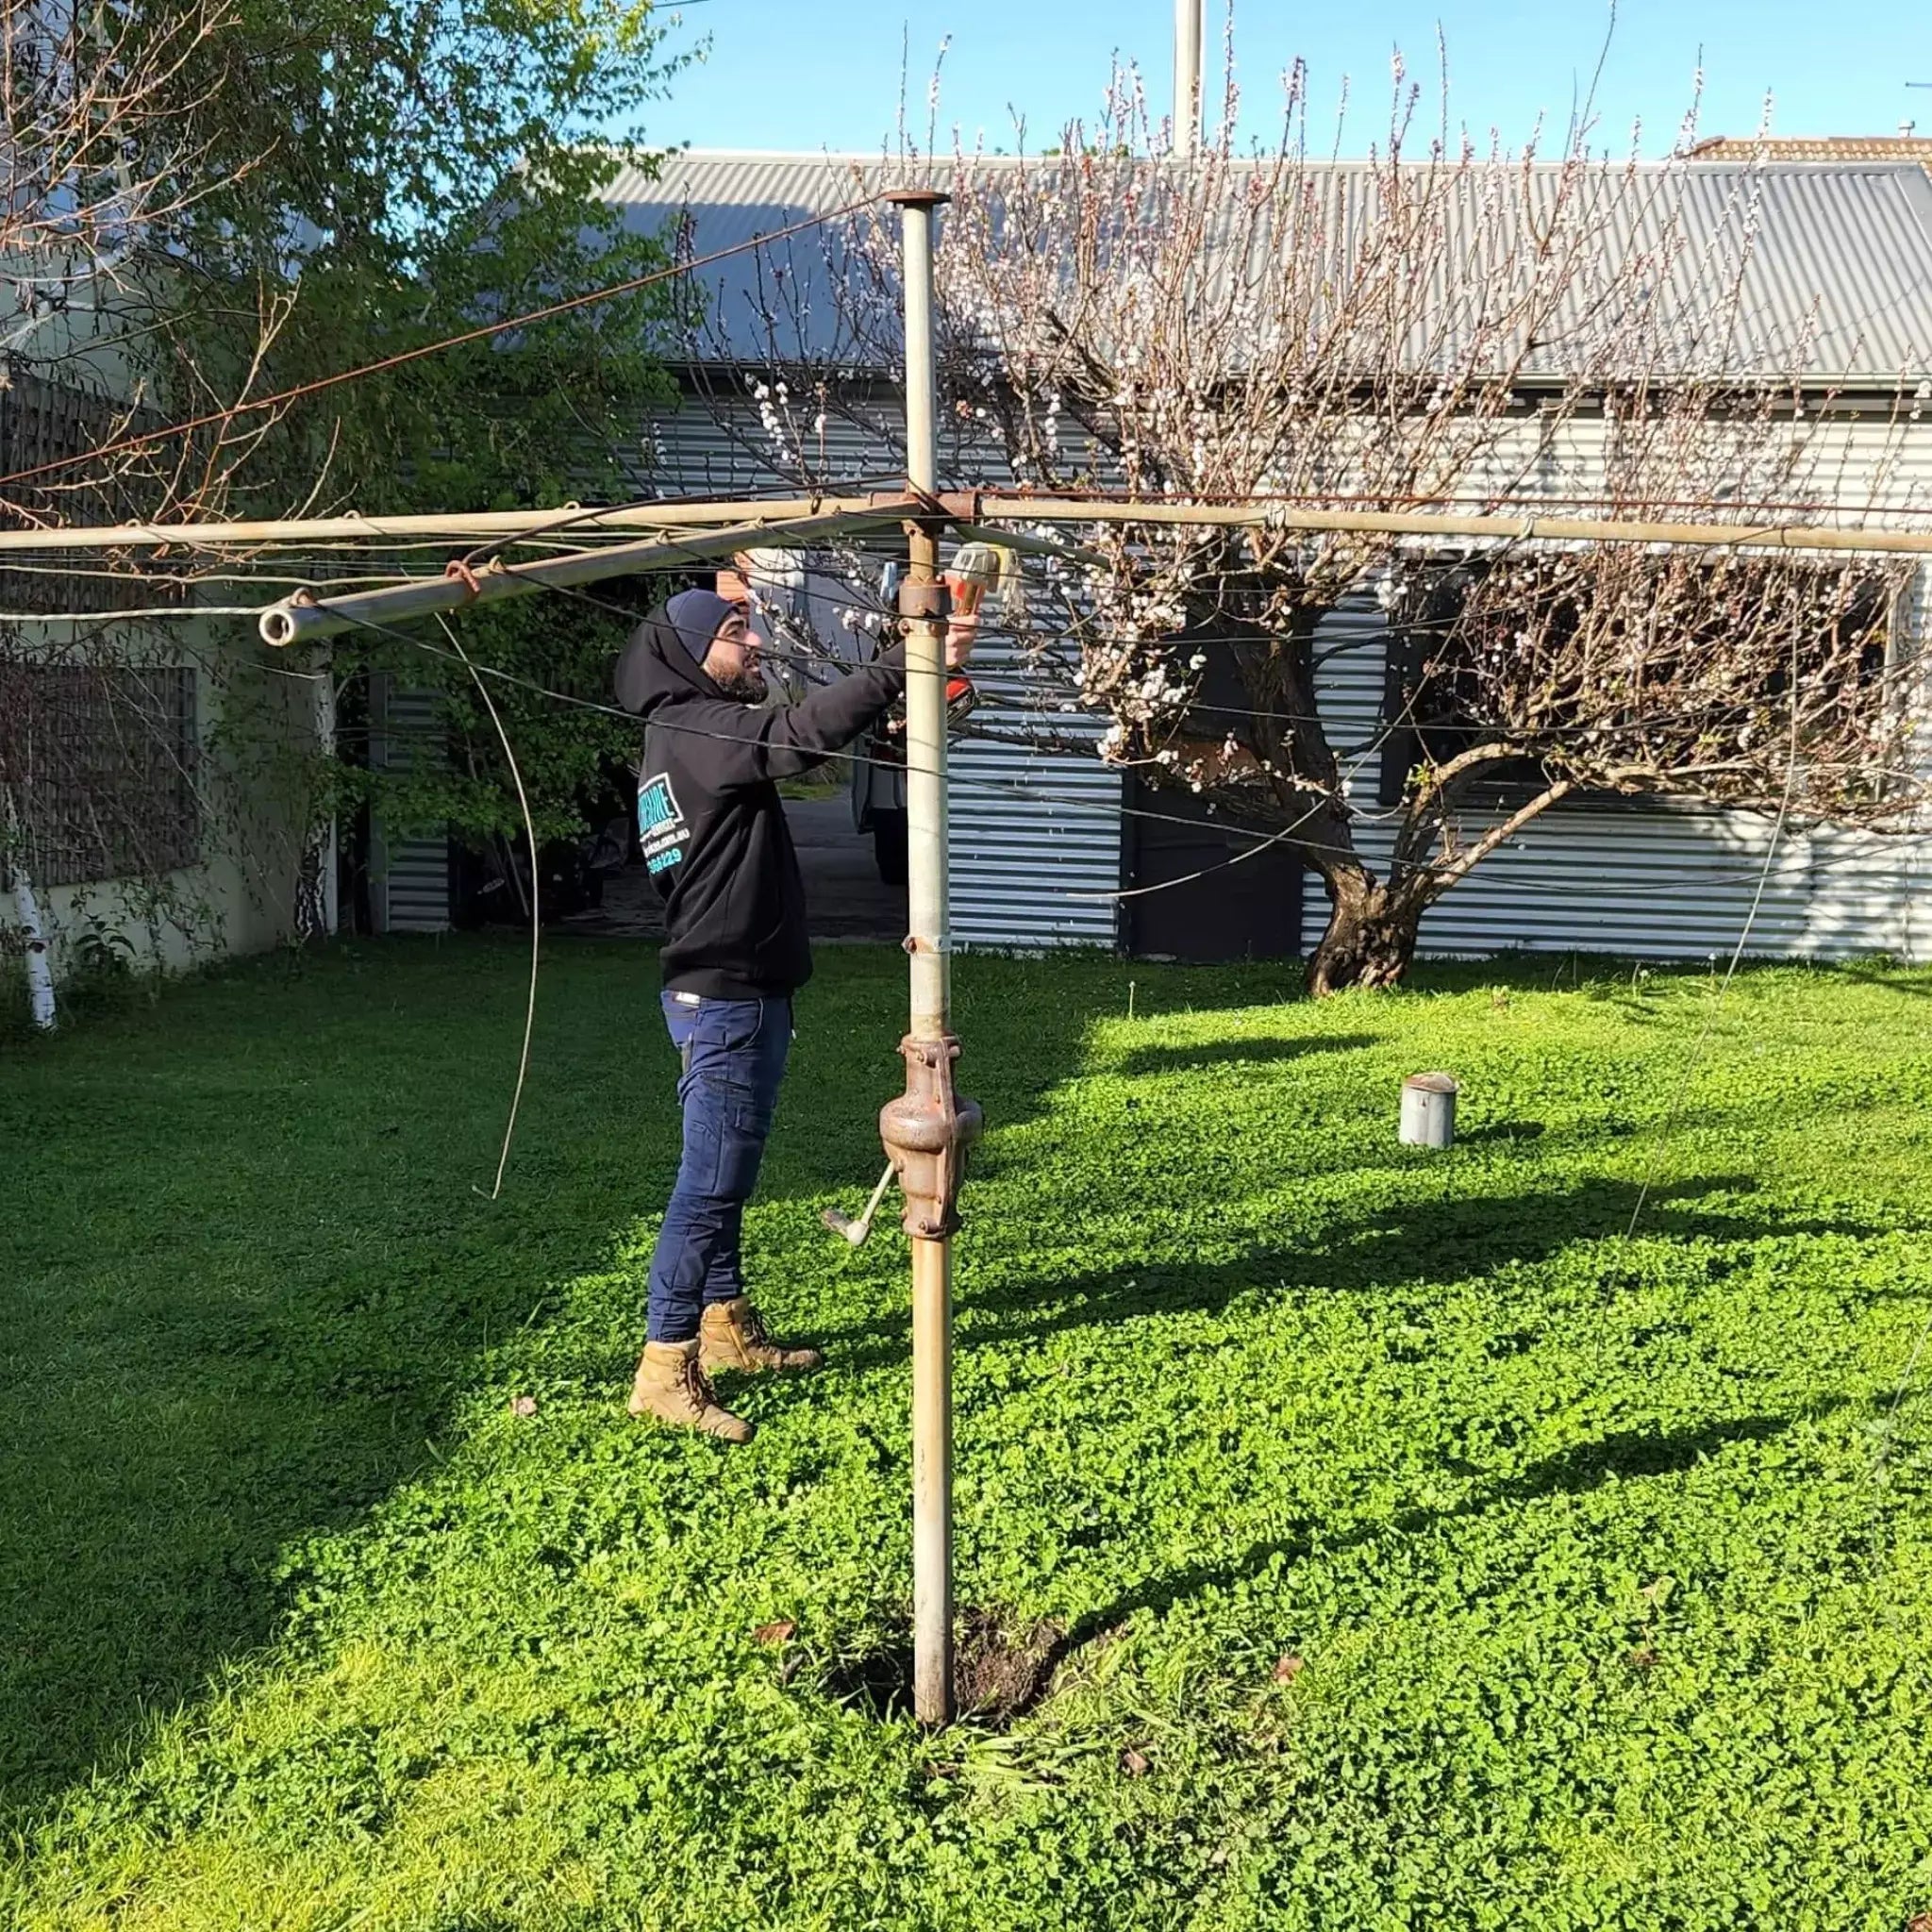 Restring old rotary clothesline with new wire in Melbourne.